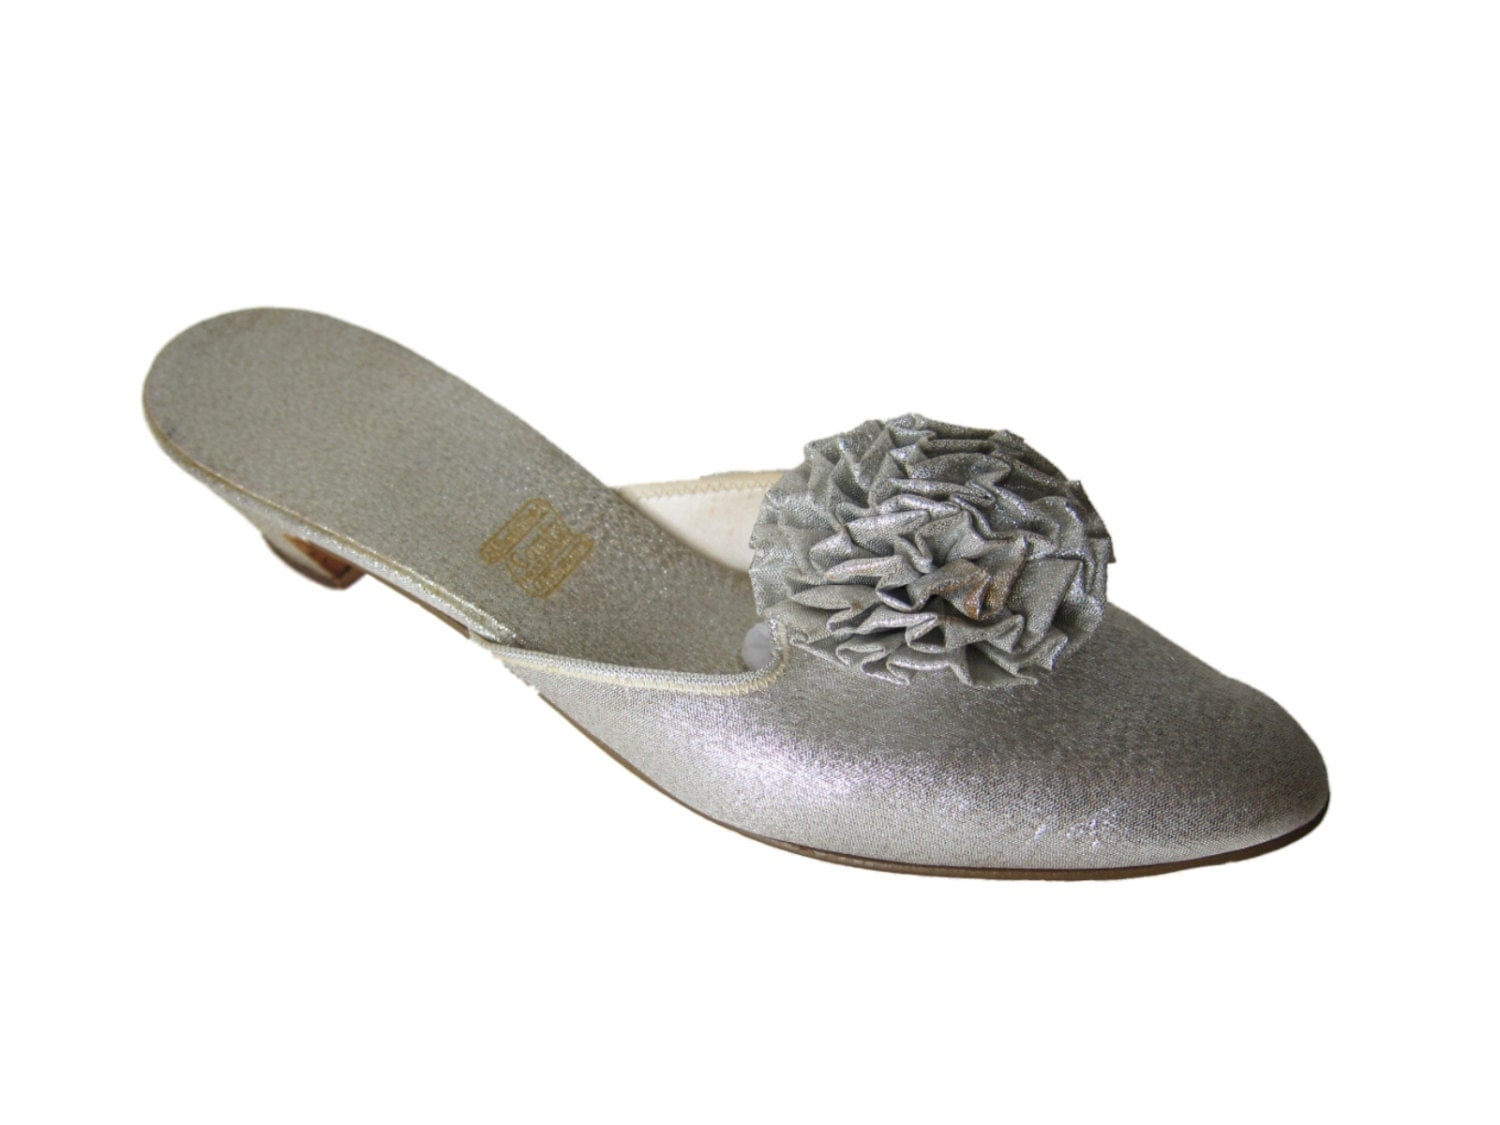 Vintage 1950s Daniel Green Slippers Silver Mules by RoseCtyRetro